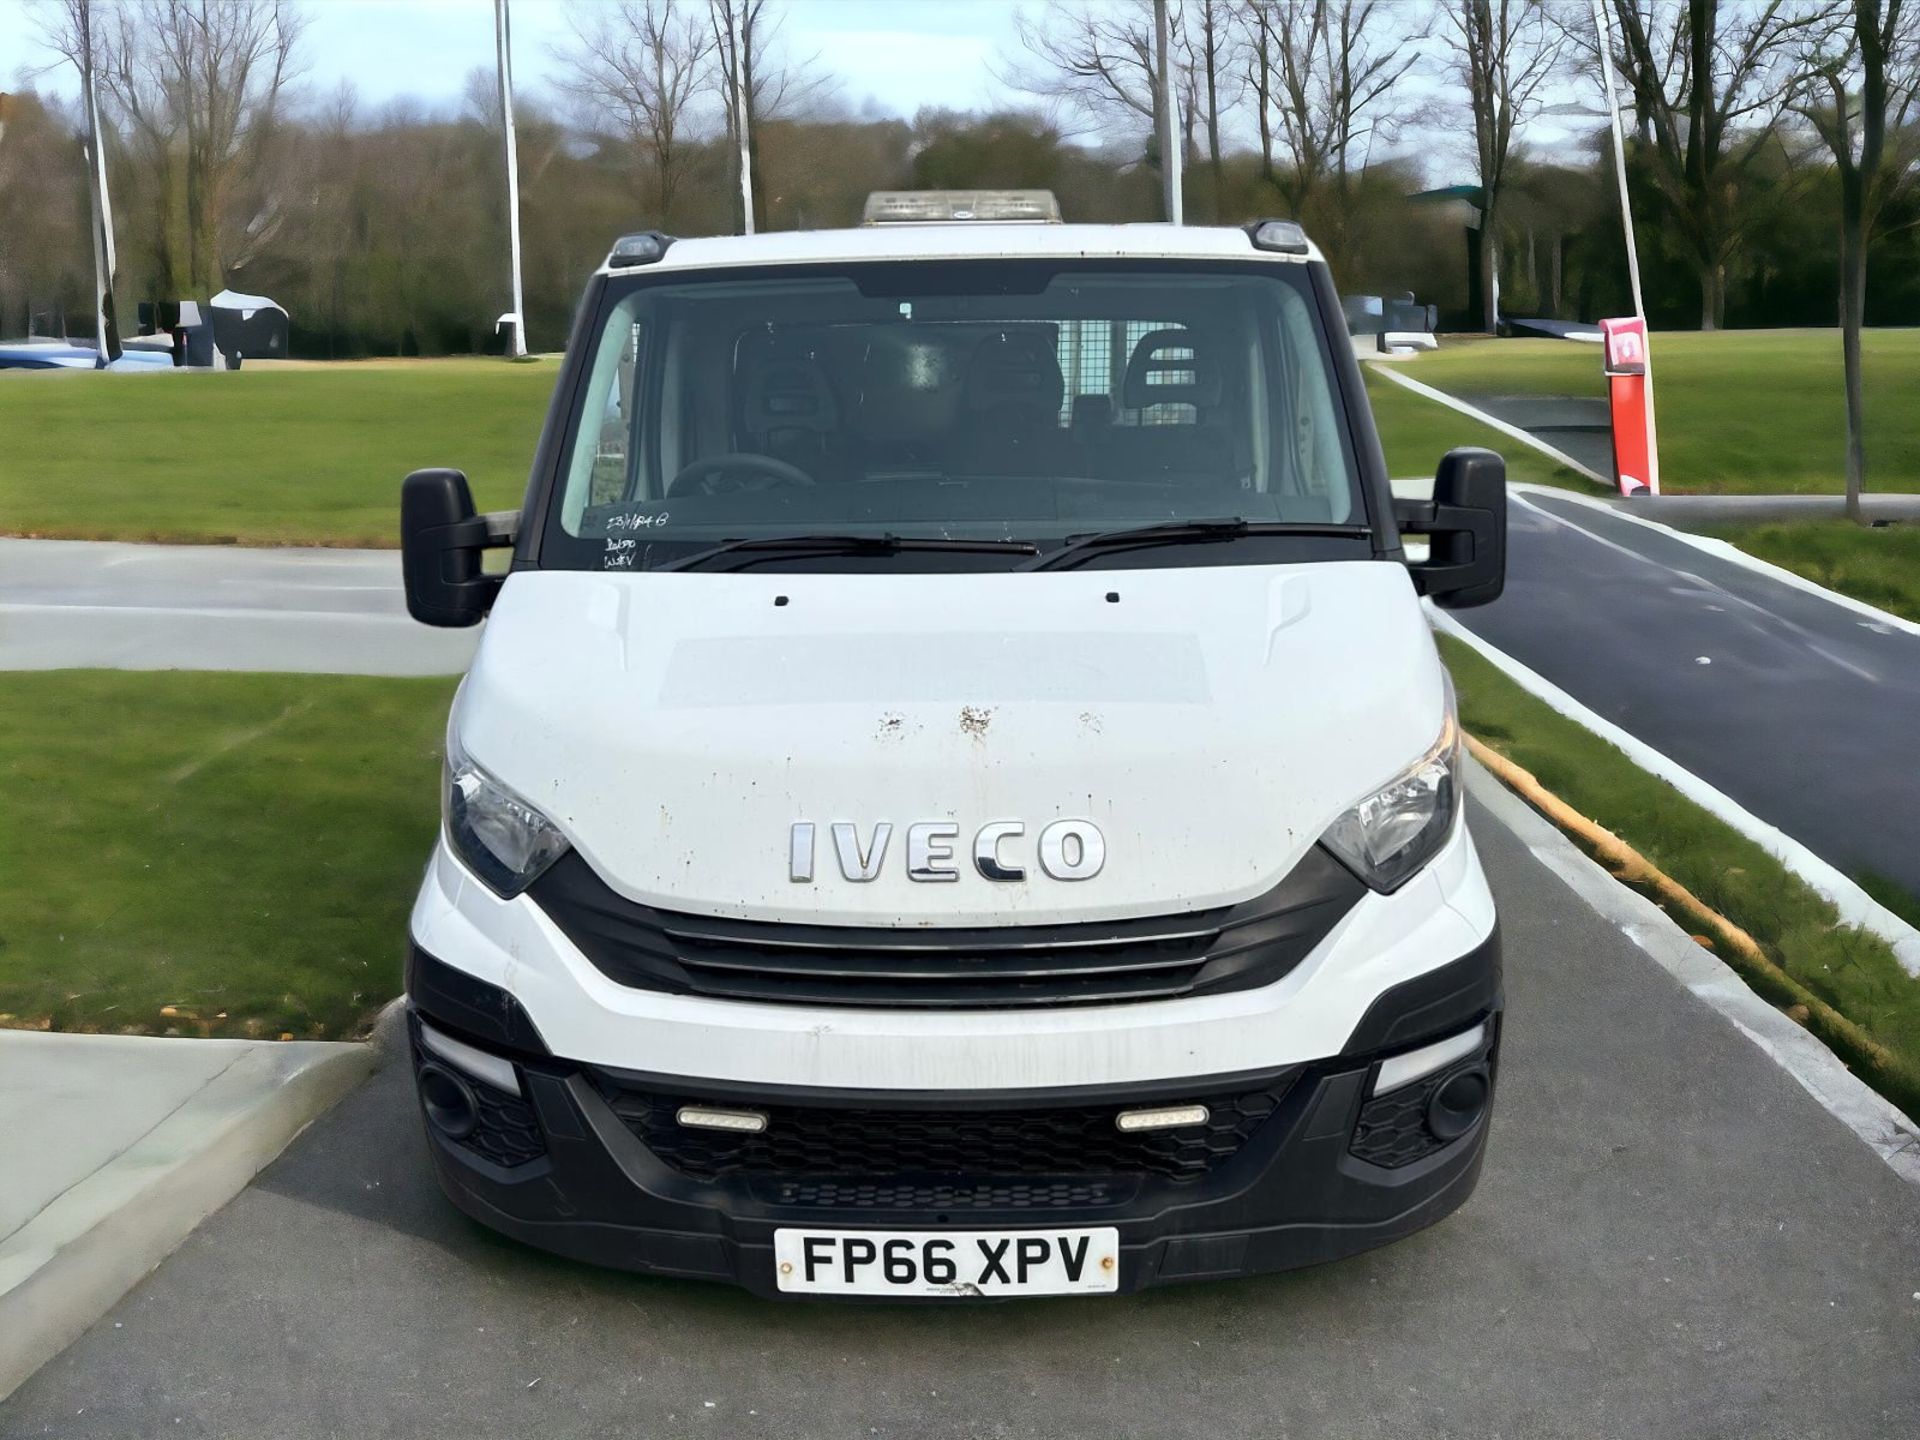 2016-66 REG IVECO DAILY DROP SIDE 35C13 - HPI CLEAR - READY TO GO! - Image 3 of 10